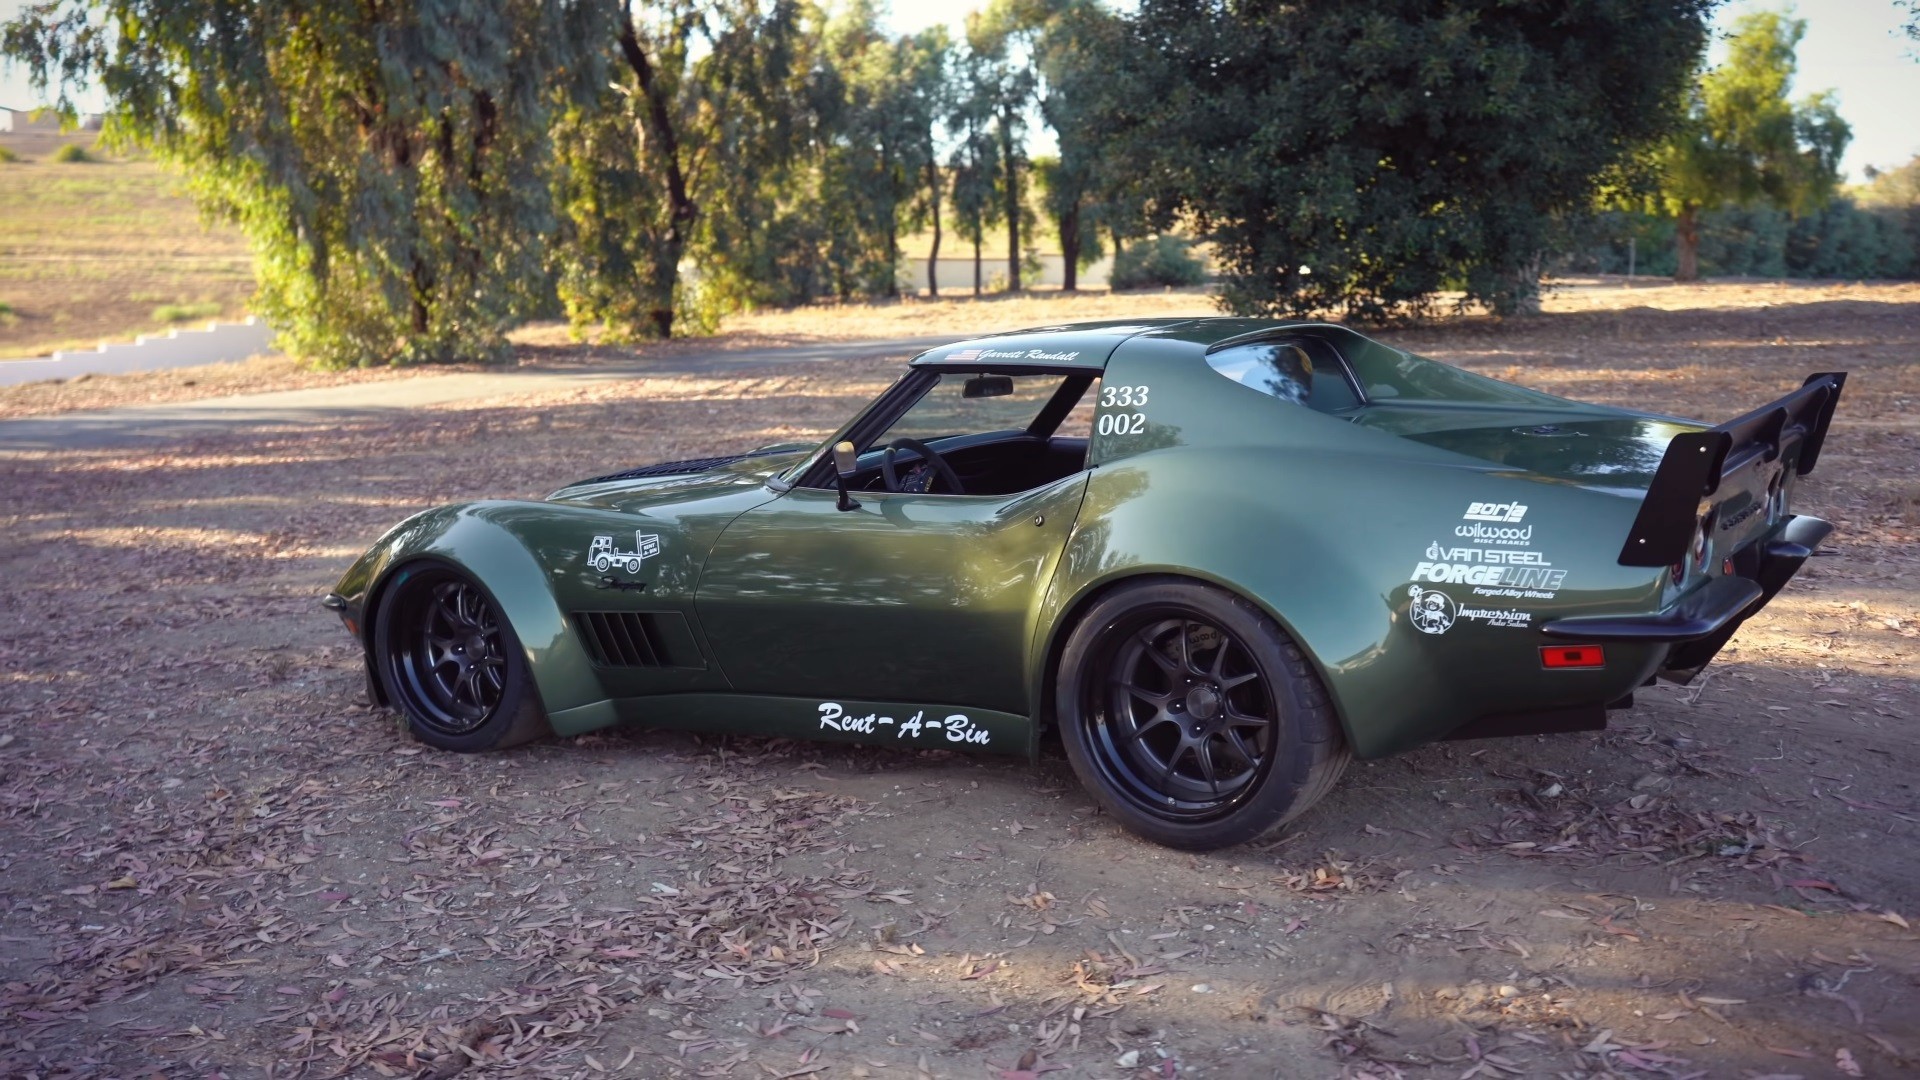 Widebody 1970 corvette c3 rambo isnt your typical pro touring build 7